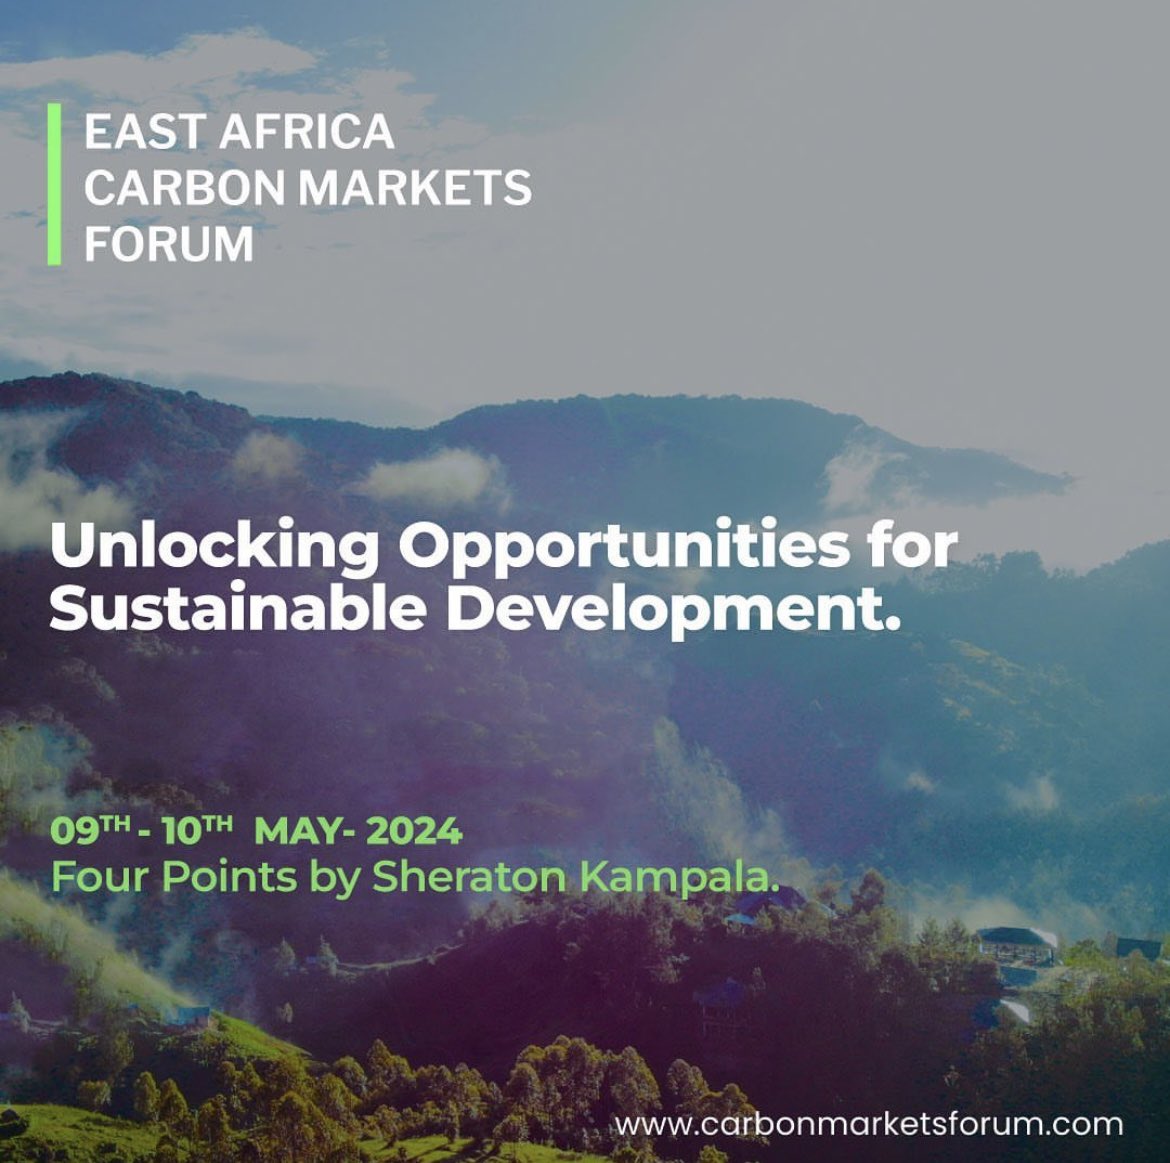 Tomorrow, I’ll join industry experts and enthusiasts in discussing the future of carbon markets and sustainable dev’t in East Africa at the 2-Day East Africa Carbon Markets Forum 2024.

For Updates 👉; @MEMD_Uganda and @EAcarbonmarkets

#EACMF2024 #EastAfricaCarbonMarketsForum